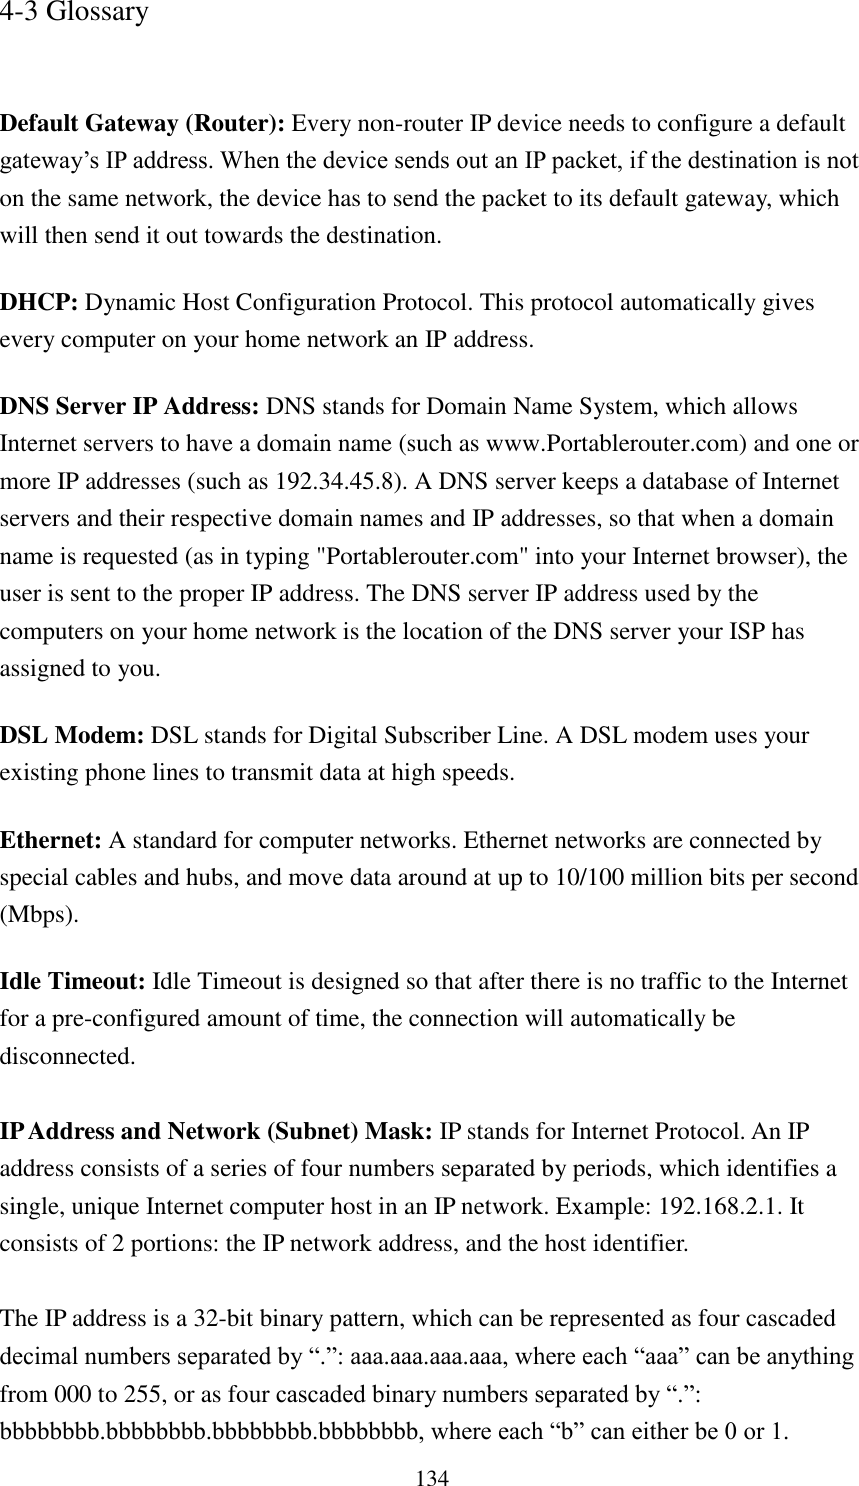 134 4-3 Glossary   Default Gateway (Router): Every non-router IP device needs to configure a default gateway‟s IP address. When the device sends out an IP packet, if the destination is not on the same network, the device has to send the packet to its default gateway, which will then send it out towards the destination. DHCP: Dynamic Host Configuration Protocol. This protocol automatically gives every computer on your home network an IP address. DNS Server IP Address: DNS stands for Domain Name System, which allows Internet servers to have a domain name (such as www.Portablerouter.com) and one or more IP addresses (such as 192.34.45.8). A DNS server keeps a database of Internet servers and their respective domain names and IP addresses, so that when a domain name is requested (as in typing &quot;Portablerouter.com&quot; into your Internet browser), the user is sent to the proper IP address. The DNS server IP address used by the computers on your home network is the location of the DNS server your ISP has assigned to you.   DSL Modem: DSL stands for Digital Subscriber Line. A DSL modem uses your existing phone lines to transmit data at high speeds.   Ethernet: A standard for computer networks. Ethernet networks are connected by special cables and hubs, and move data around at up to 10/100 million bits per second (Mbps).   Idle Timeout: Idle Timeout is designed so that after there is no traffic to the Internet for a pre-configured amount of time, the connection will automatically be disconnected.  IP Address and Network (Subnet) Mask: IP stands for Internet Protocol. An IP address consists of a series of four numbers separated by periods, which identifies a single, unique Internet computer host in an IP network. Example: 192.168.2.1. It consists of 2 portions: the IP network address, and the host identifier.  The IP address is a 32-bit binary pattern, which can be represented as four cascaded decimal numbers separated by “.”: aaa.aaa.aaa.aaa, where each “aaa” can be anything from 000 to 255, or as four cascaded binary numbers separated by “.”: bbbbbbbb.bbbbbbbb.bbbbbbbb.bbbbbbbb, where each “b” can either be 0 or 1. 